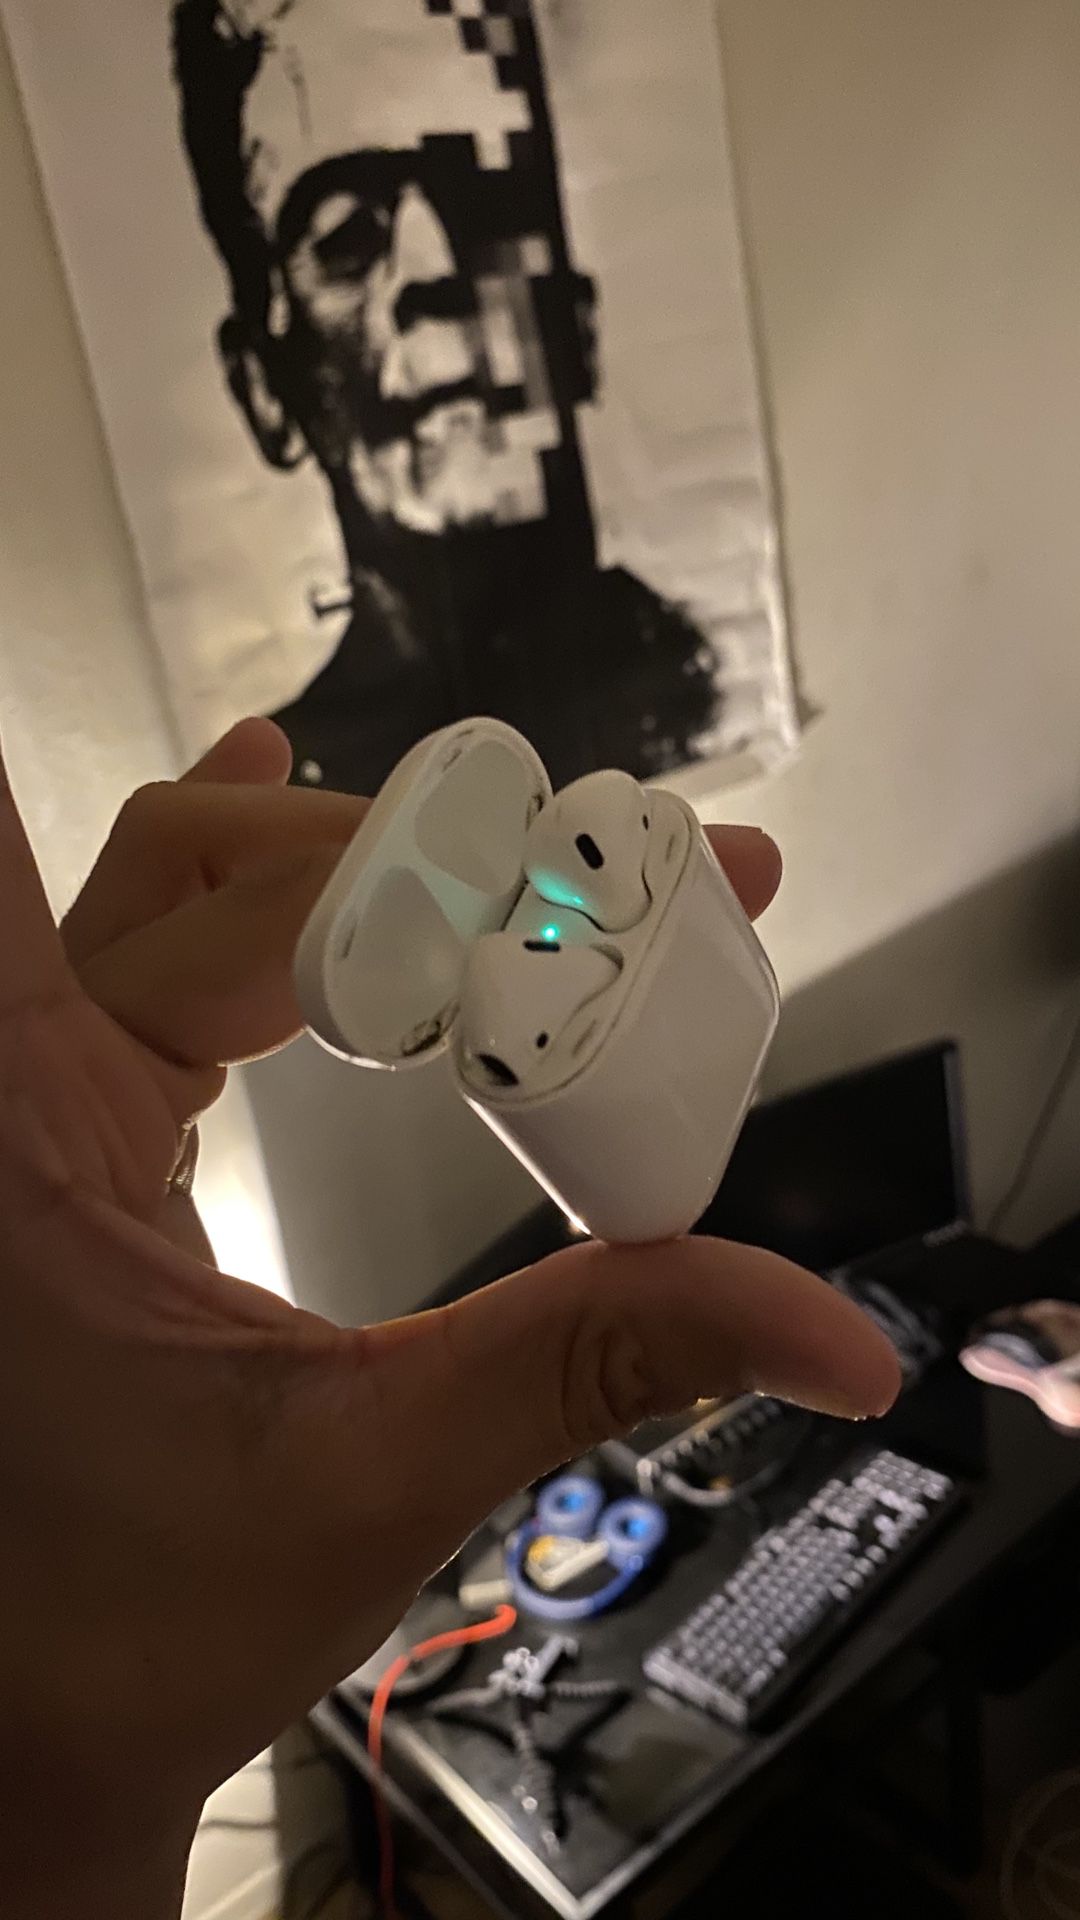 GEN 1 Airpods - for parts